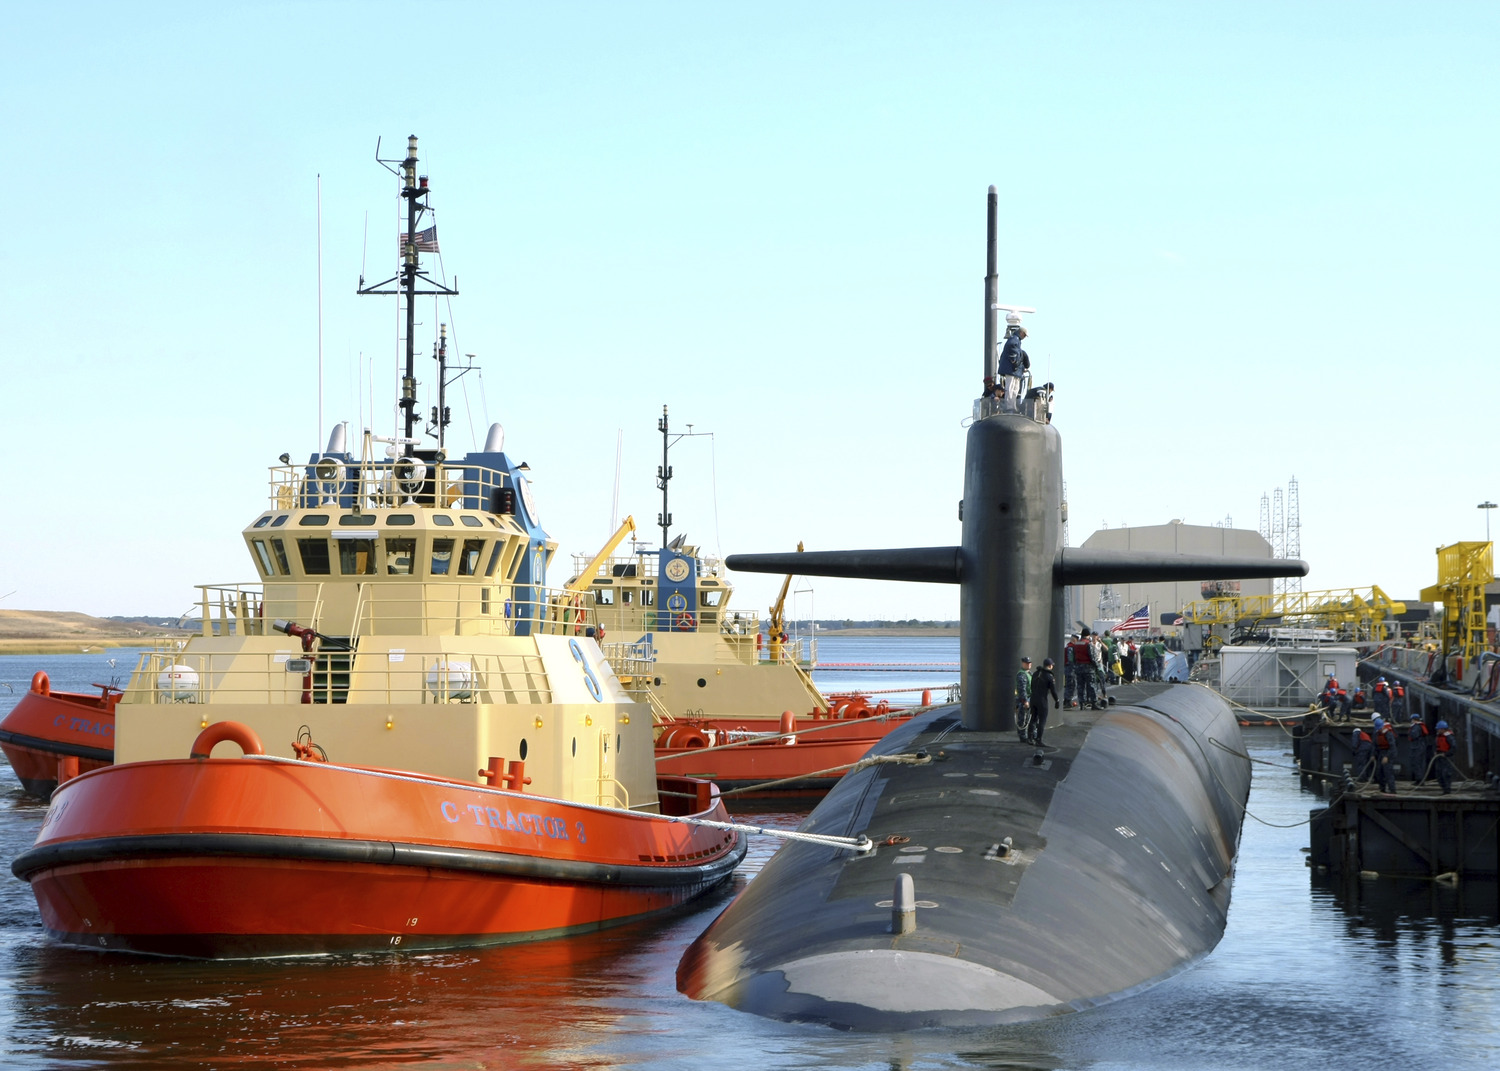 101216-N-6523K-007 
KINGS BAY, Ga. (Dec. 16, 2010) The ballistic-missile submarine USS West Virginia (SSBN 736) pulls into Naval Submarine Base Kings Bay after conducting routine operations. (U.S. Navy photo by Mass Communication Specialist 1st Class James Kimber/Released)